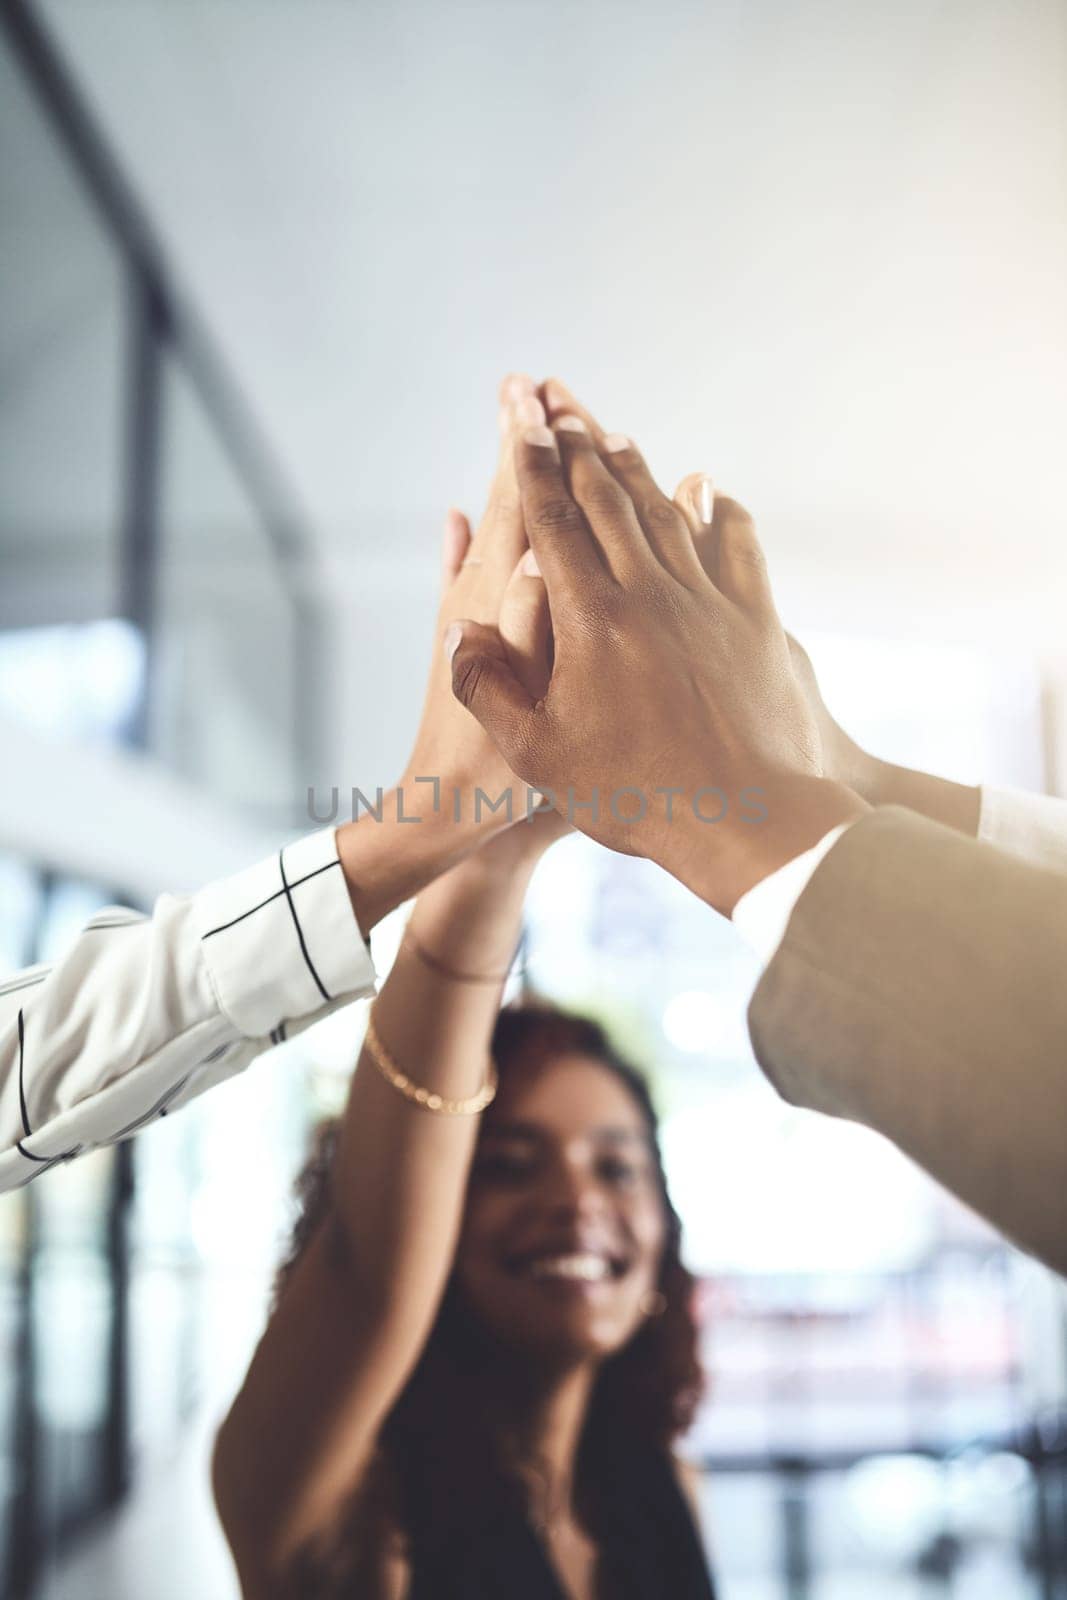 All our efforts scored us another win. Closeup shot of a group of businesspeople giving each other a high five in an office